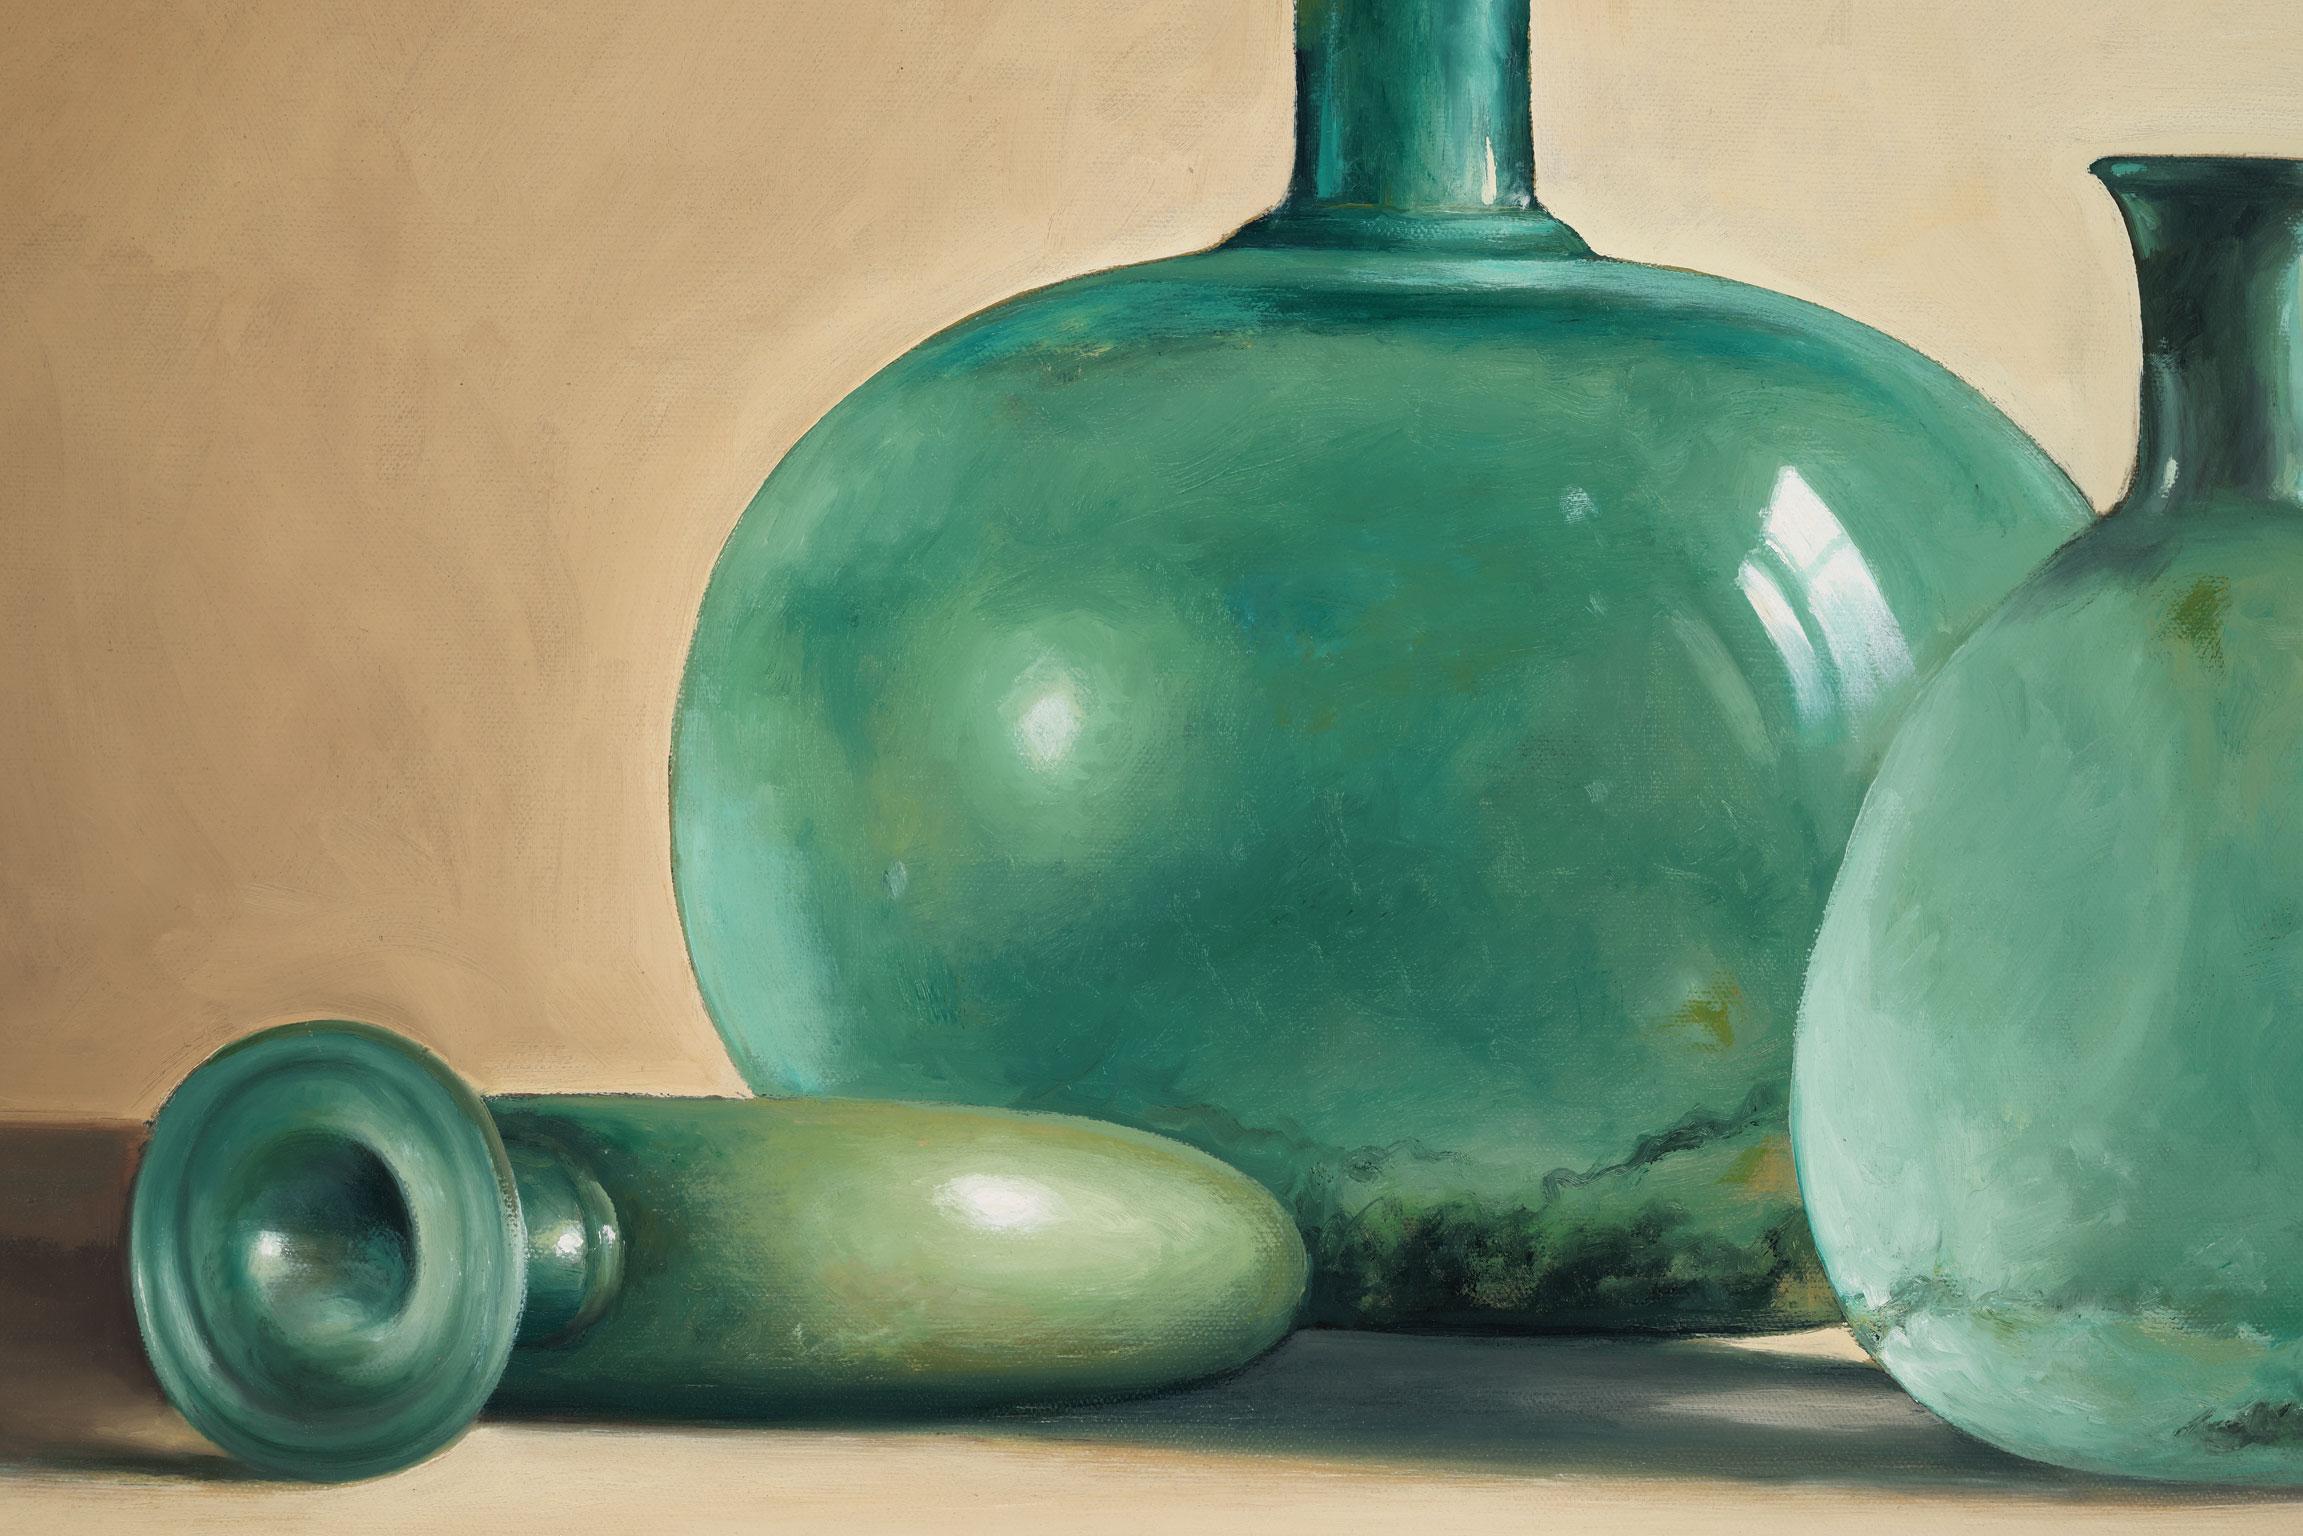 Untitled [Green Glass Bottles], an original oil on canvas by Robert K. White, is a piece for the true collector. White’s careful attention to detail and vivid use of greens and tans project from the painting, immediately capturing the viewer's